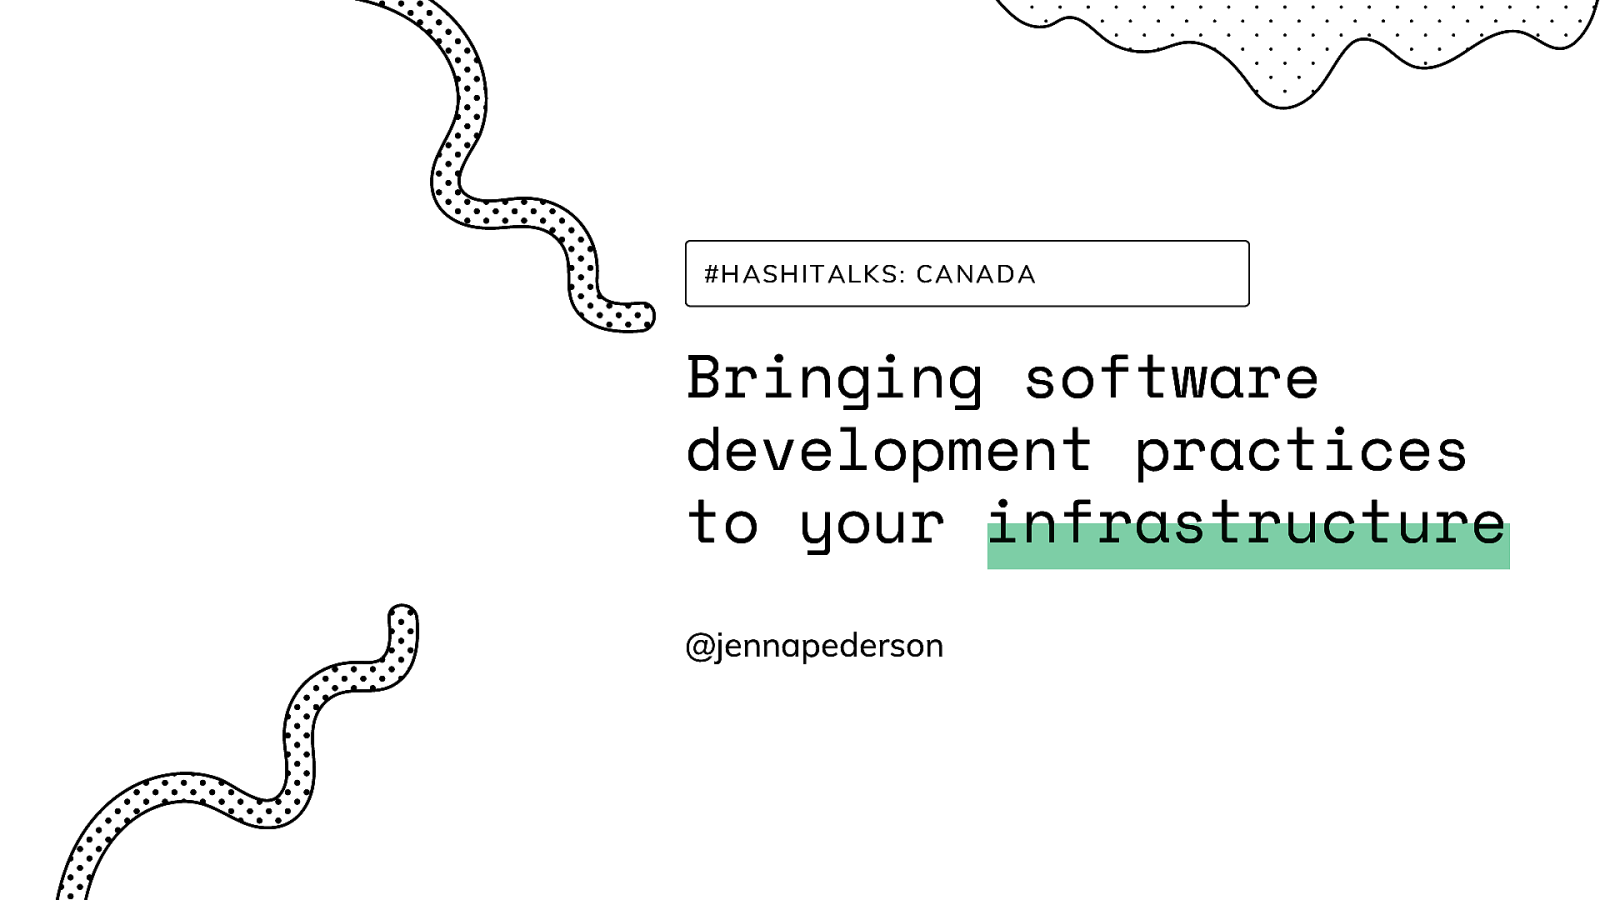 Bringing software development practices to your infrastructure